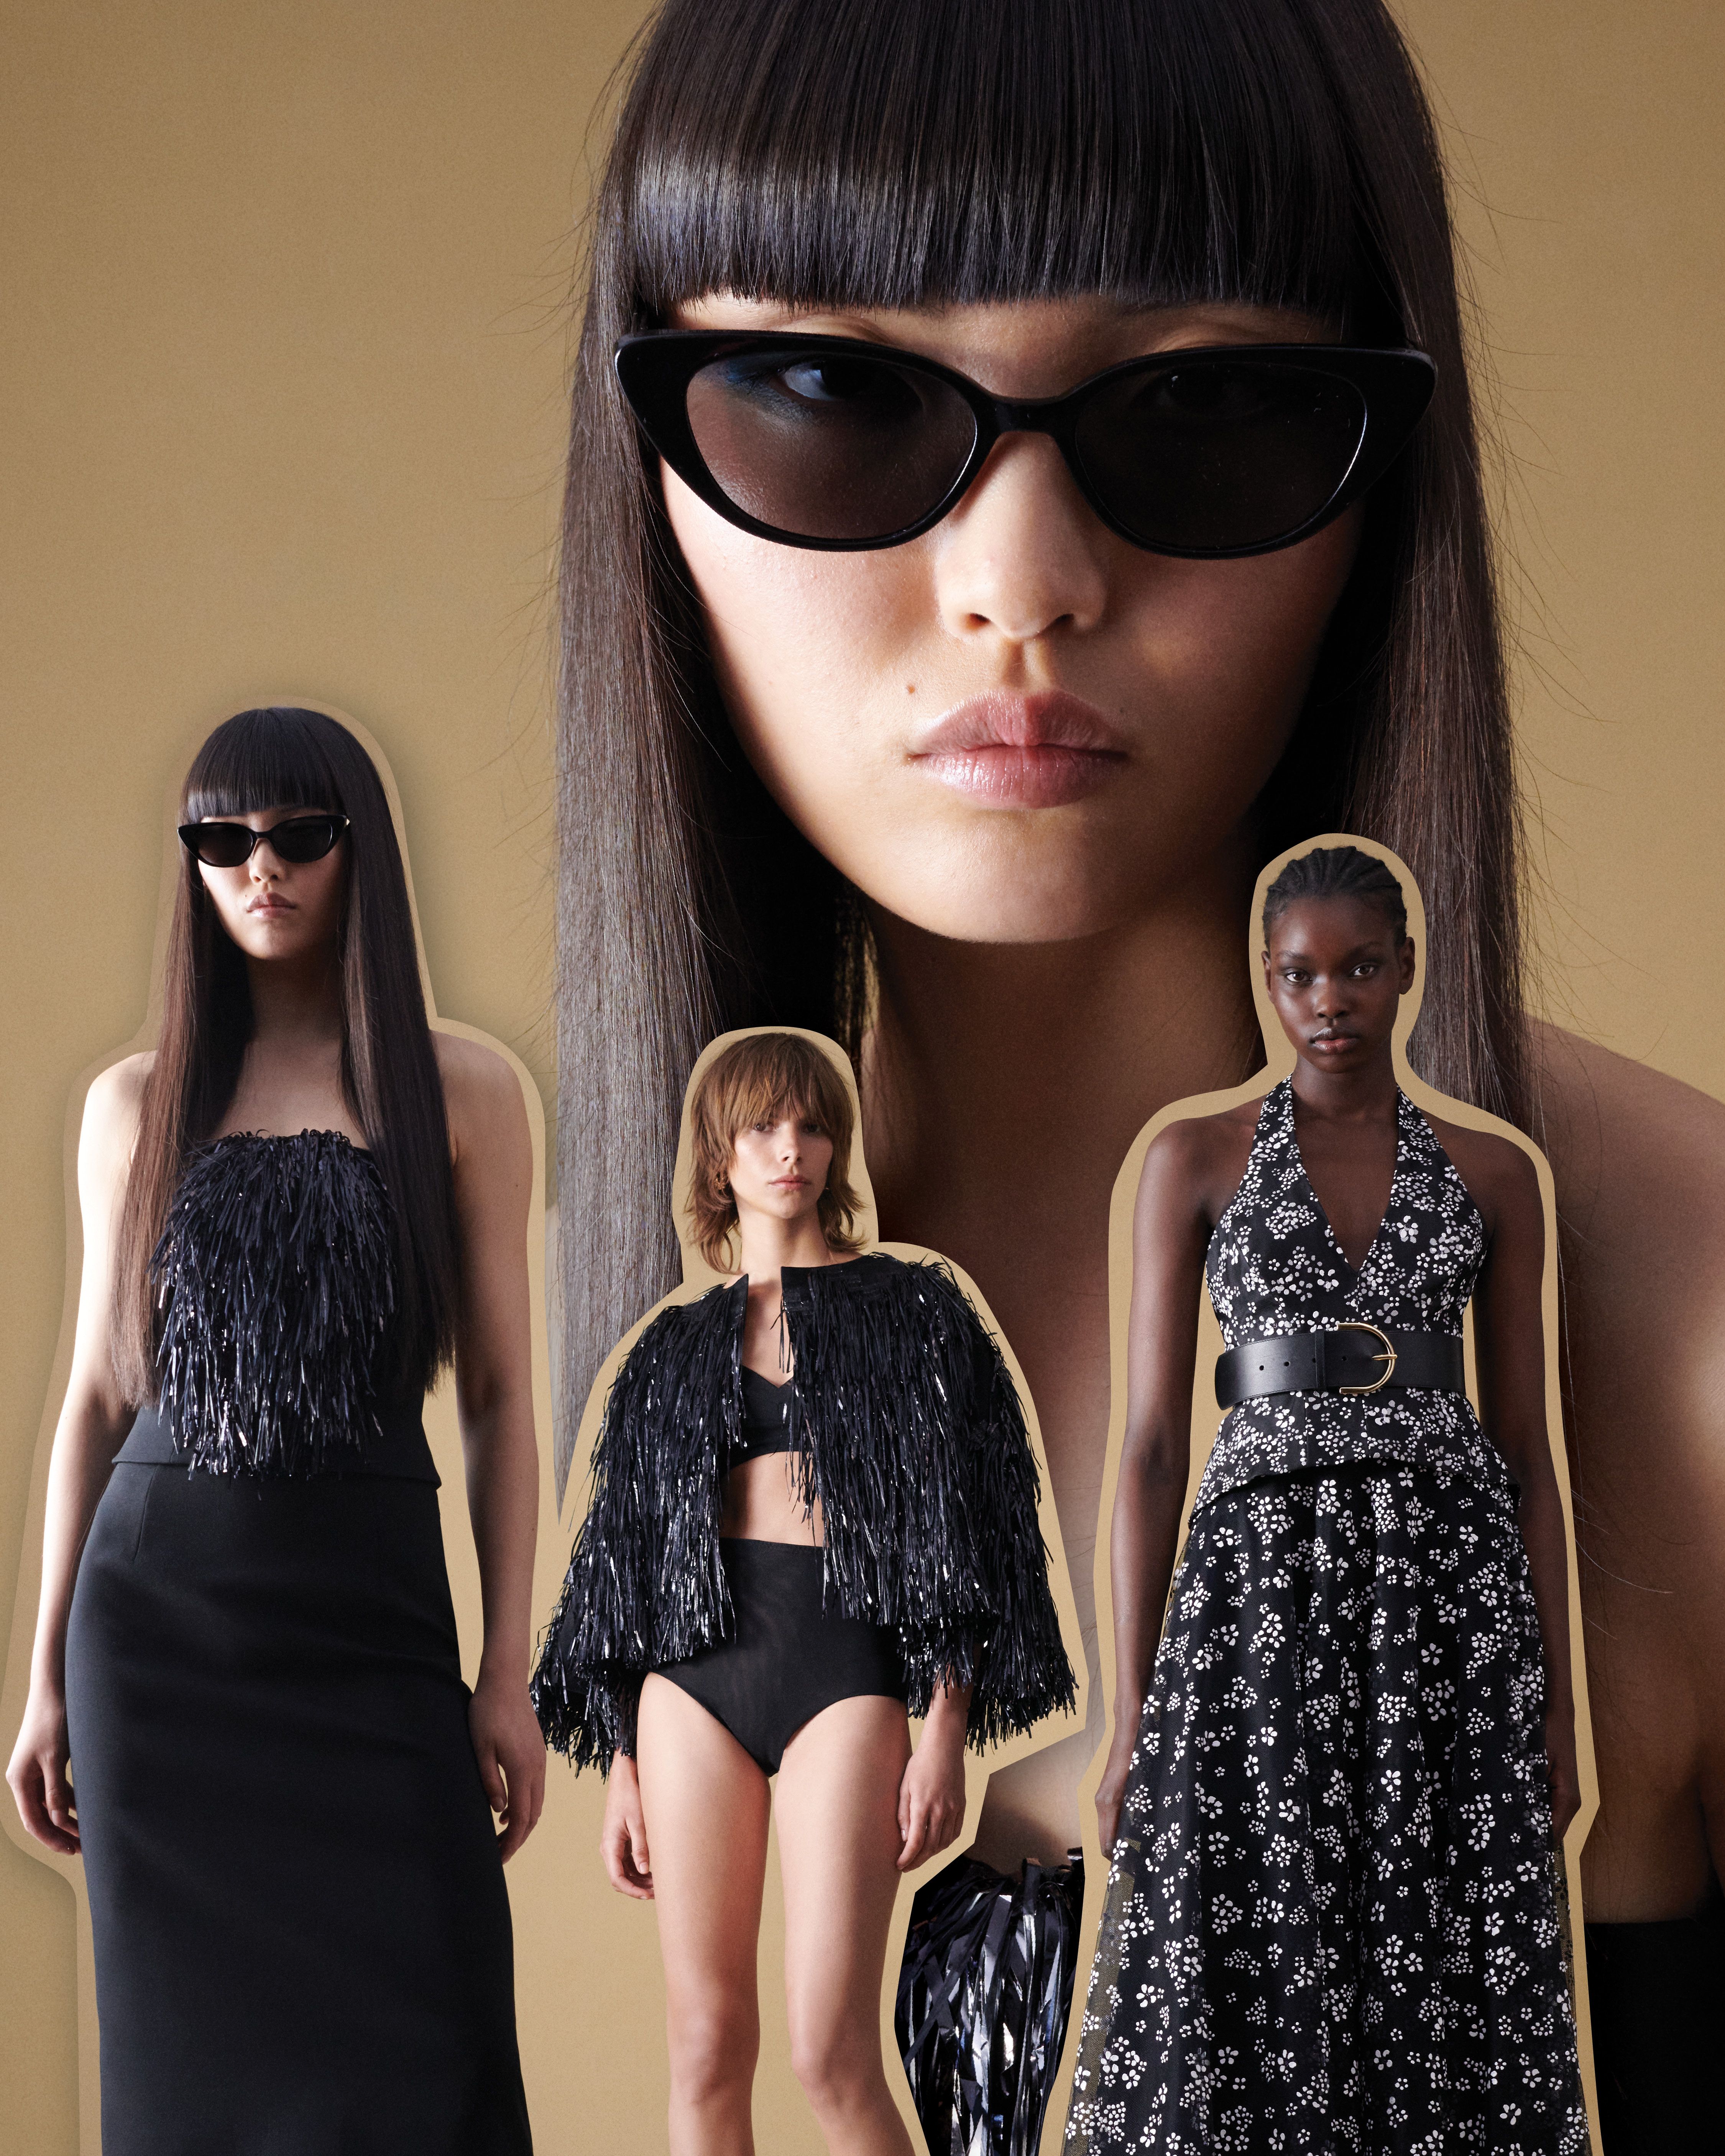 Close up of model wearing black sunglasses, with cut out images of three models overlaid on top wearing black occasionwear